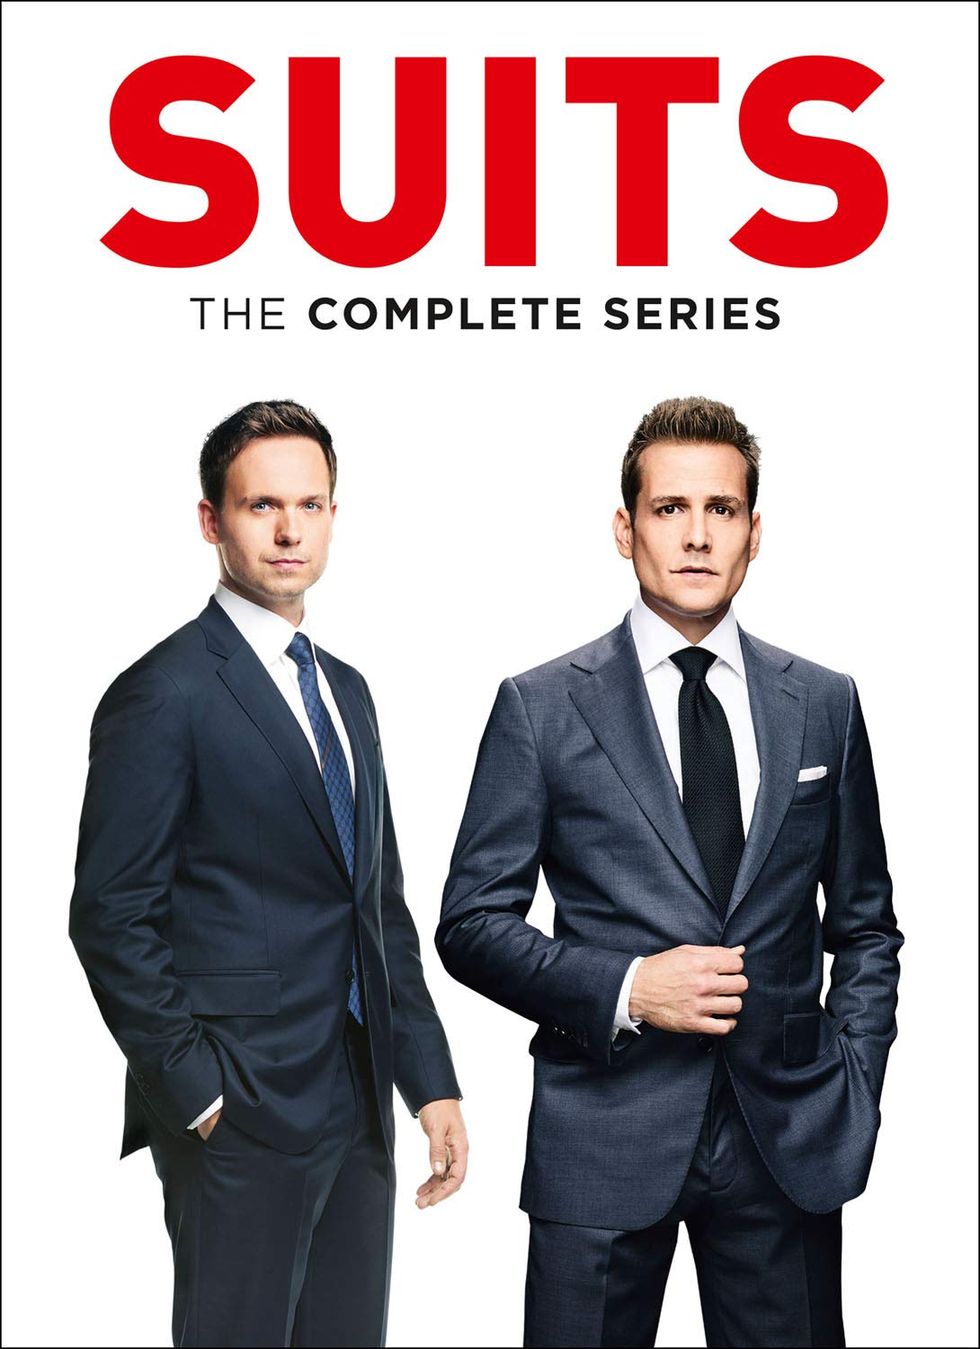 Suits: The Complete Series on DVD